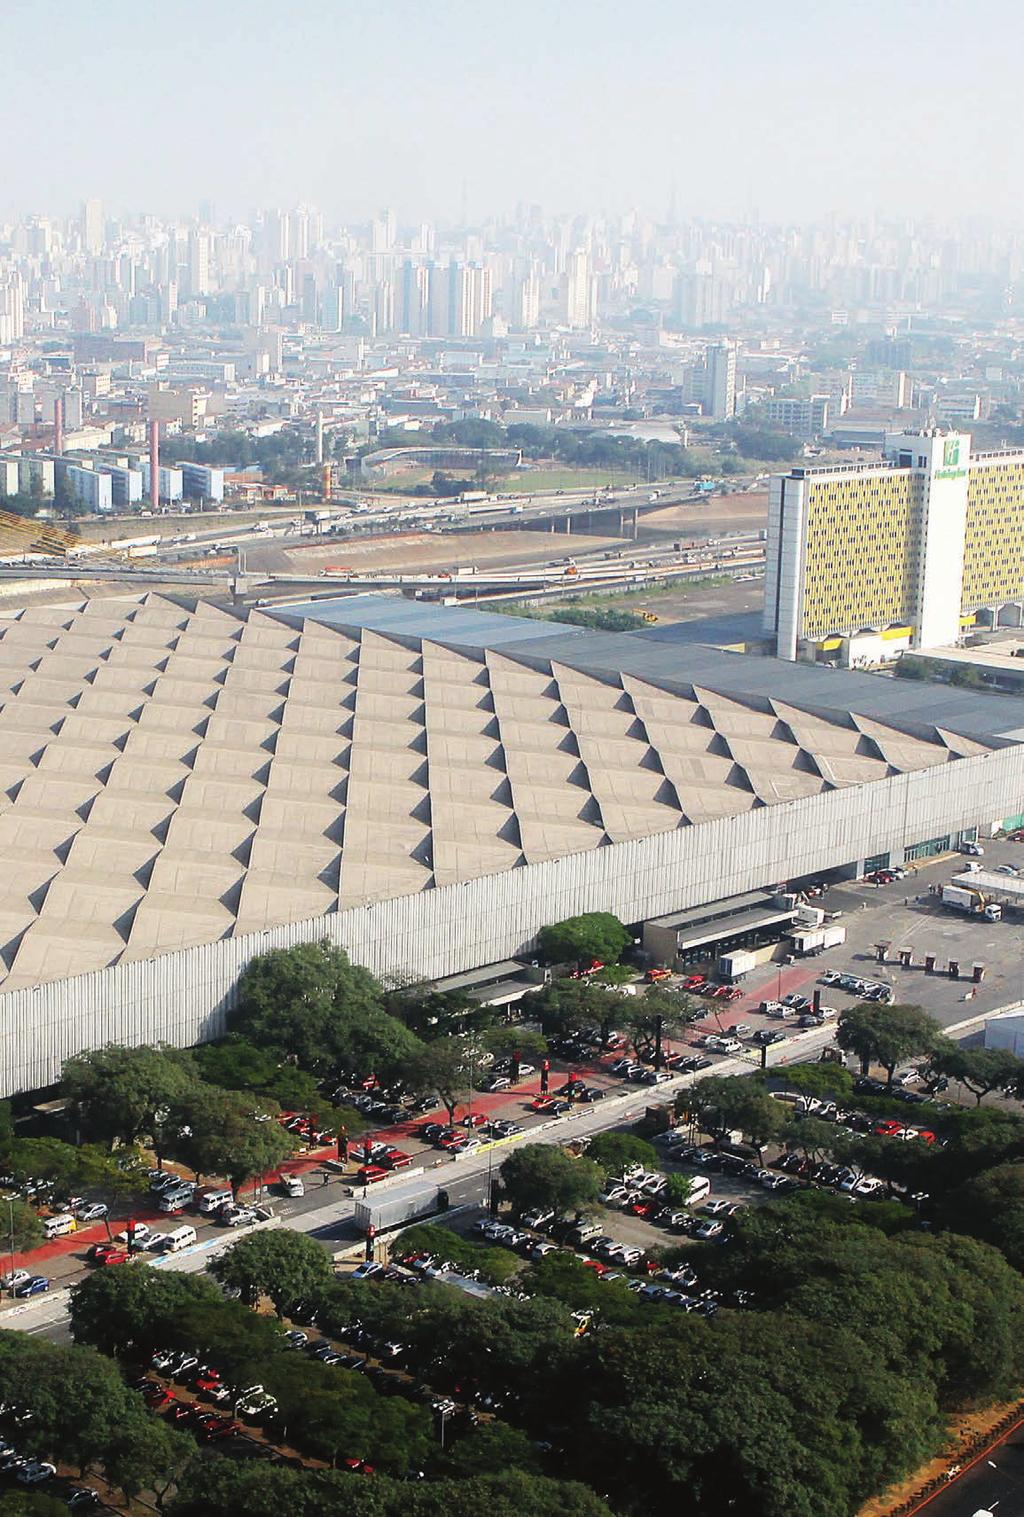 ANHEMBI PARK THE VENUE FOR THE WORLDSKILLS SÃO PAULO 2015 IS ONE OF